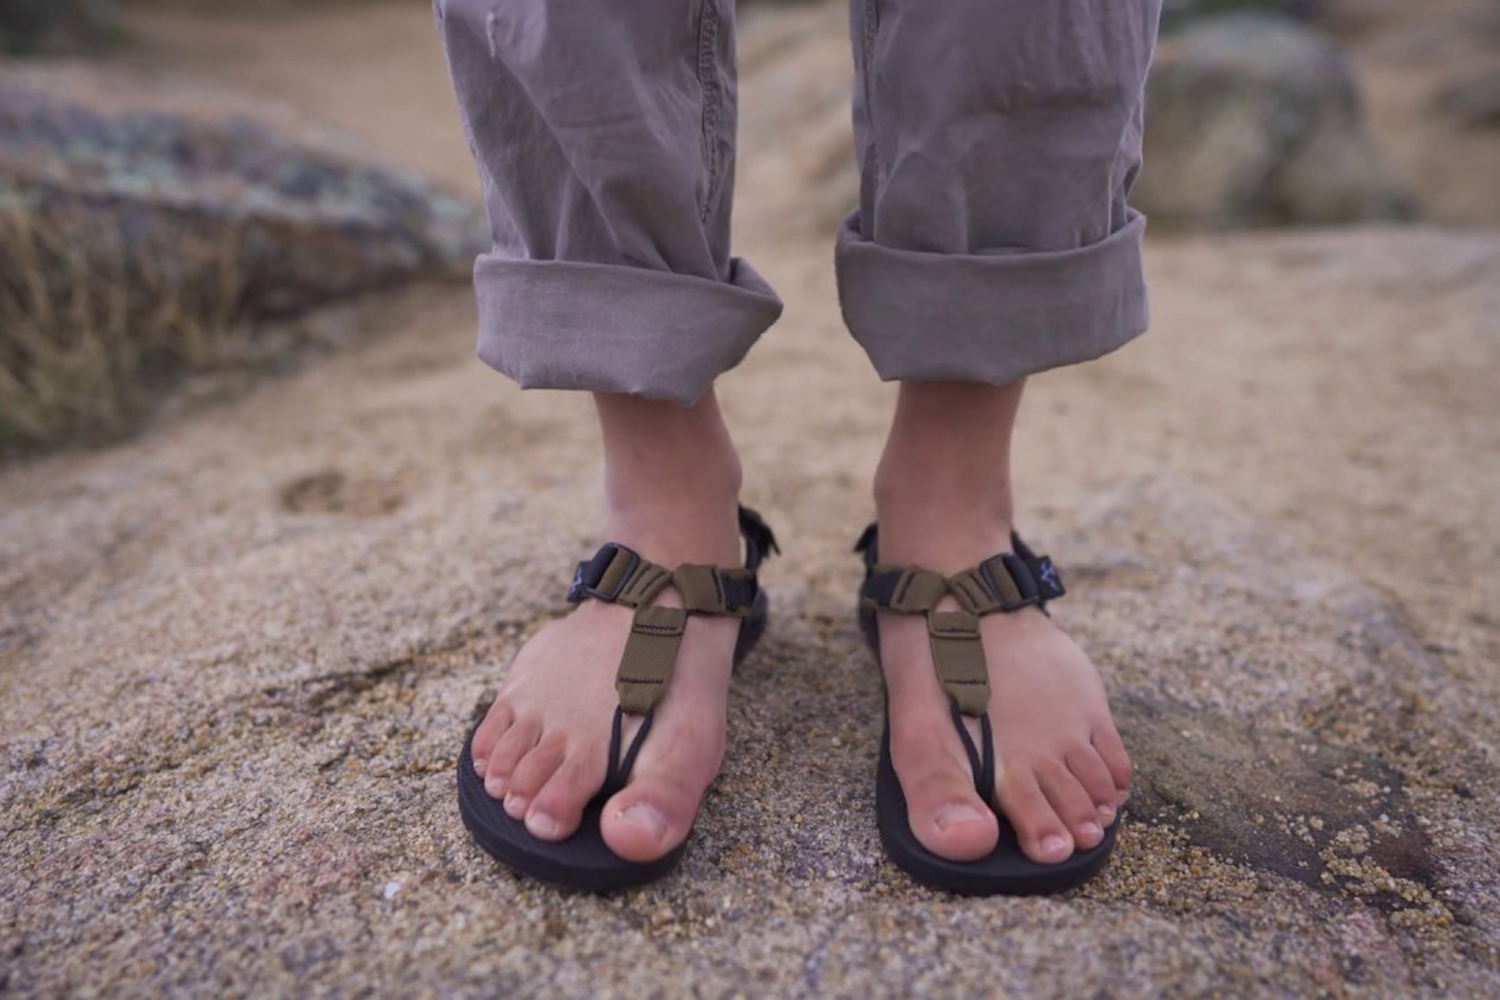 Bedrock Sandals makes an effort to help the planet by resoling its sandals and replacing worn straps in 2022